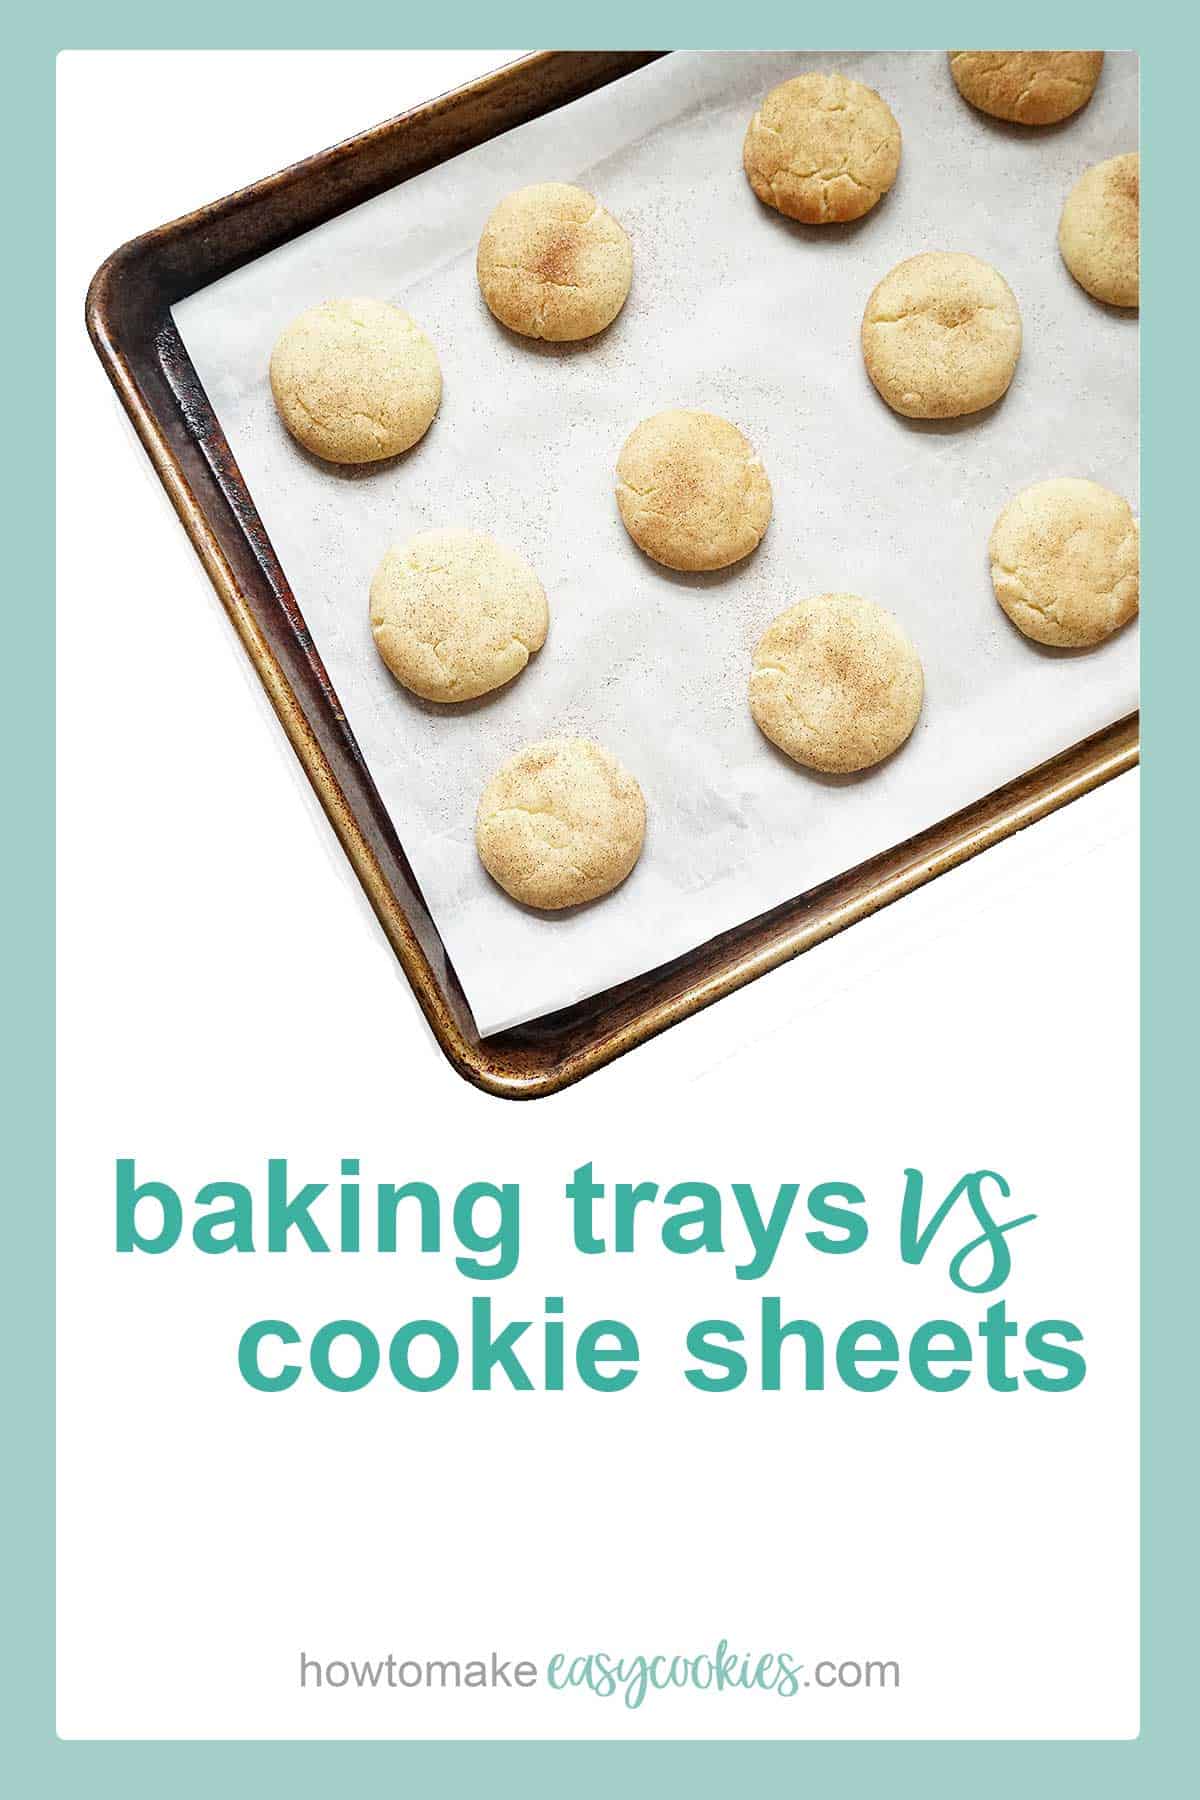 baking trays vs. cookie sheets and the differences in baking cookies 